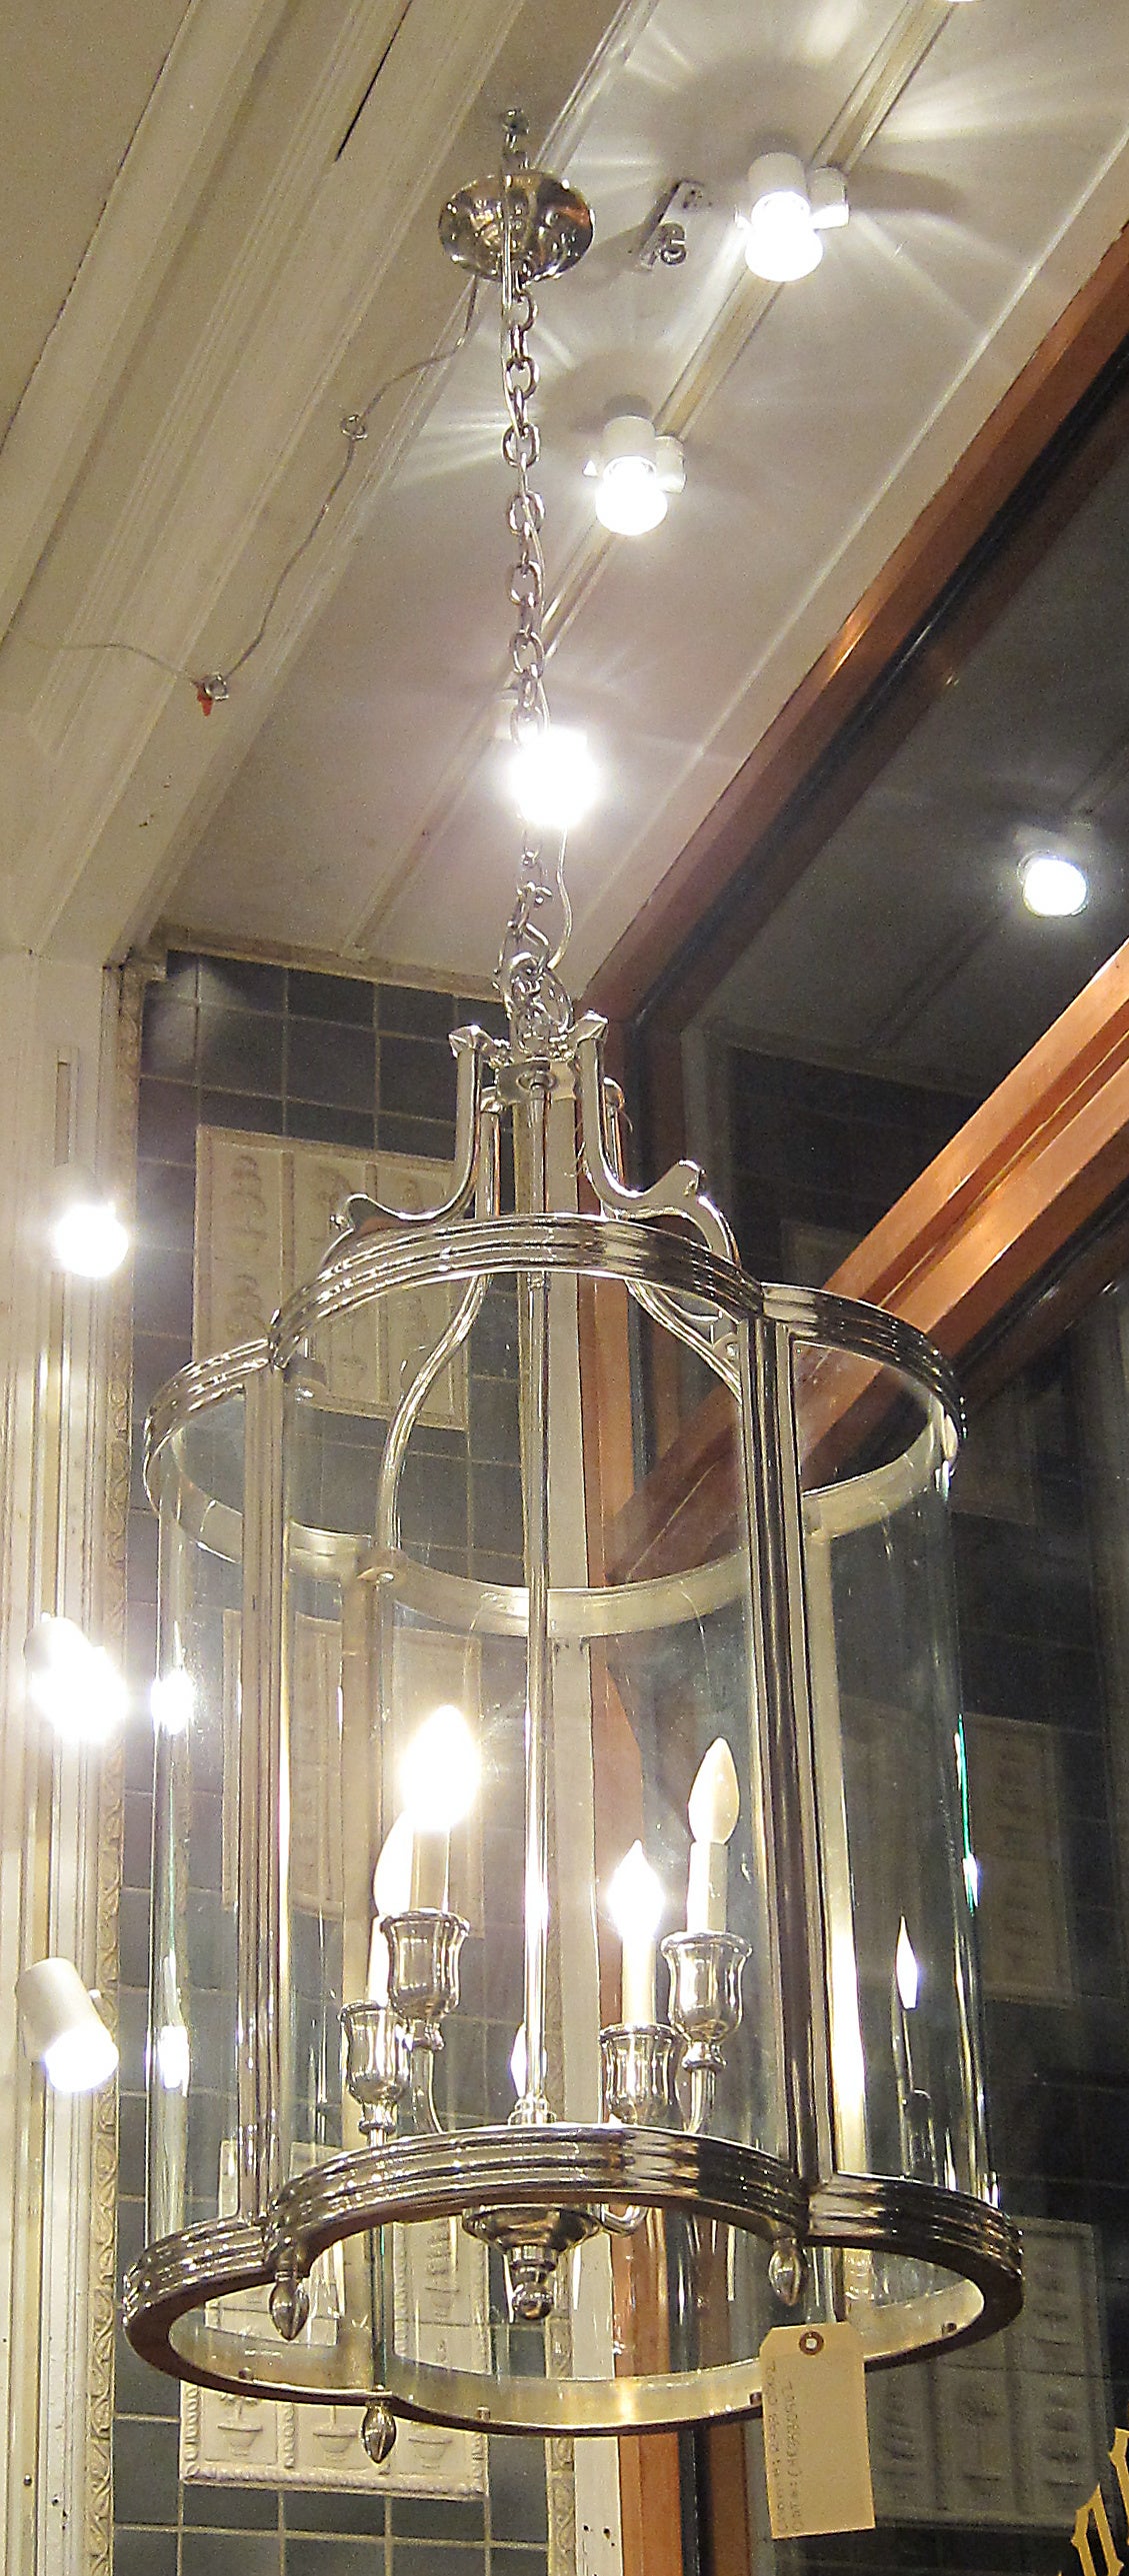 Georgian style quatrefoil pendant lantern with ribbed body details and curved glass inserts. Shown in a nickel finish. This item can be viewed at our 5 East 16th St, Union Square location in Manhattan.